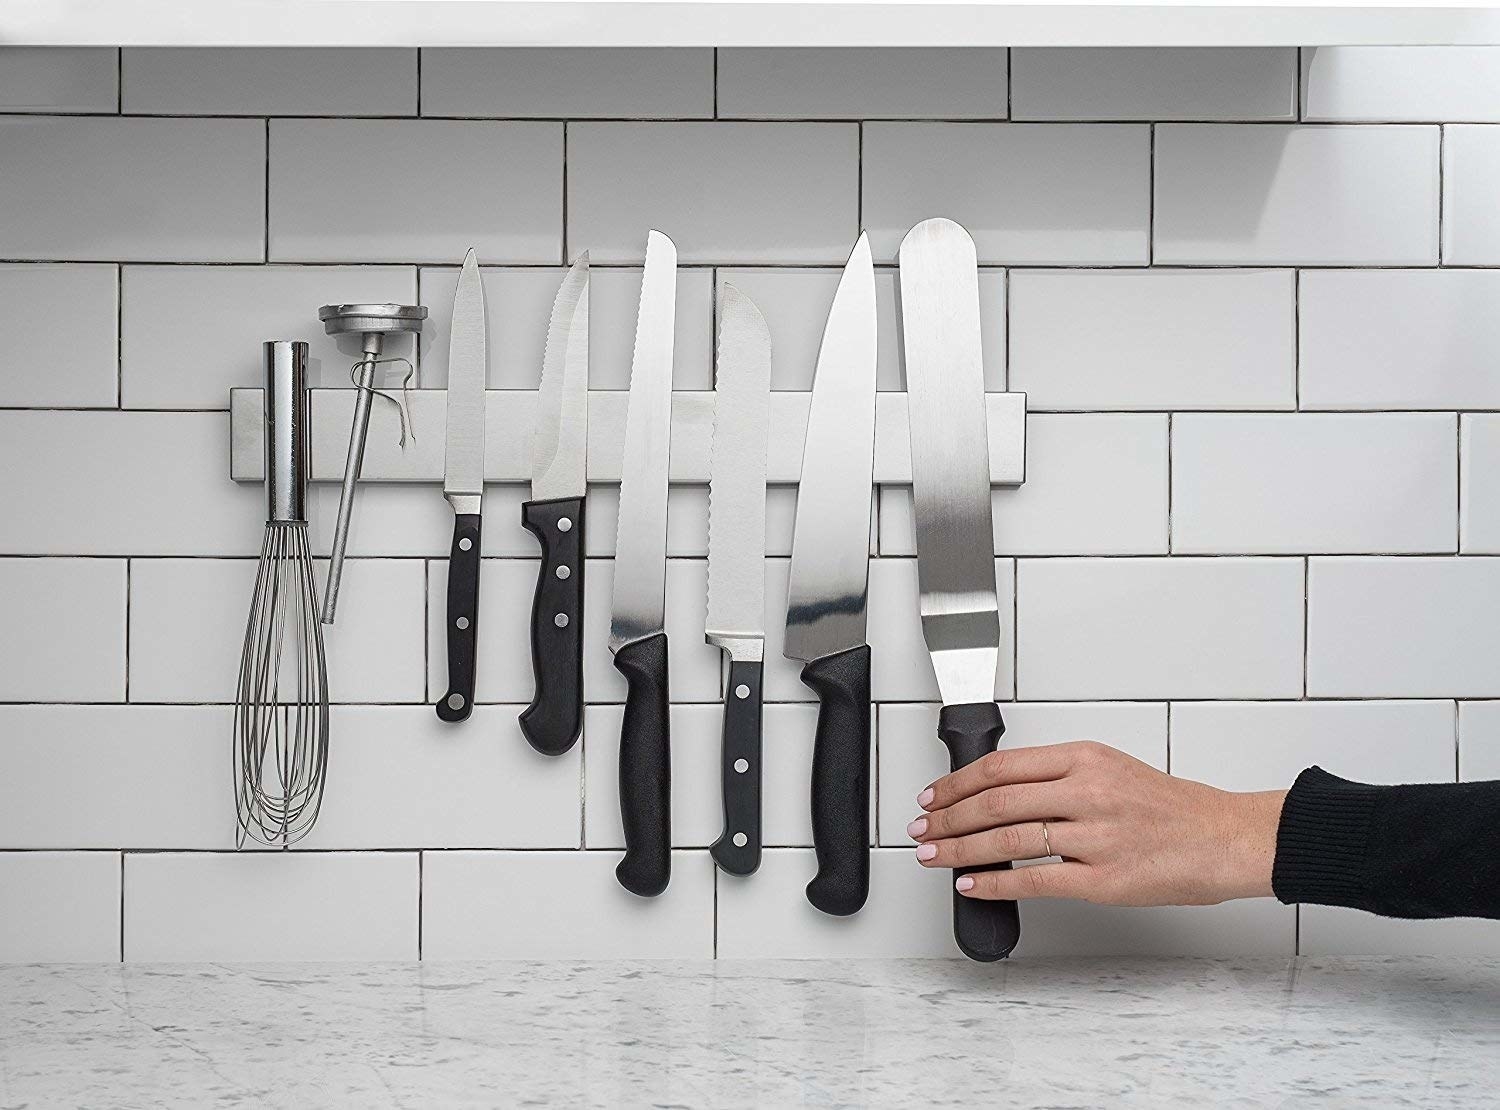 the long rectangle strip on a wall with assorted knives and kitchen tools on it